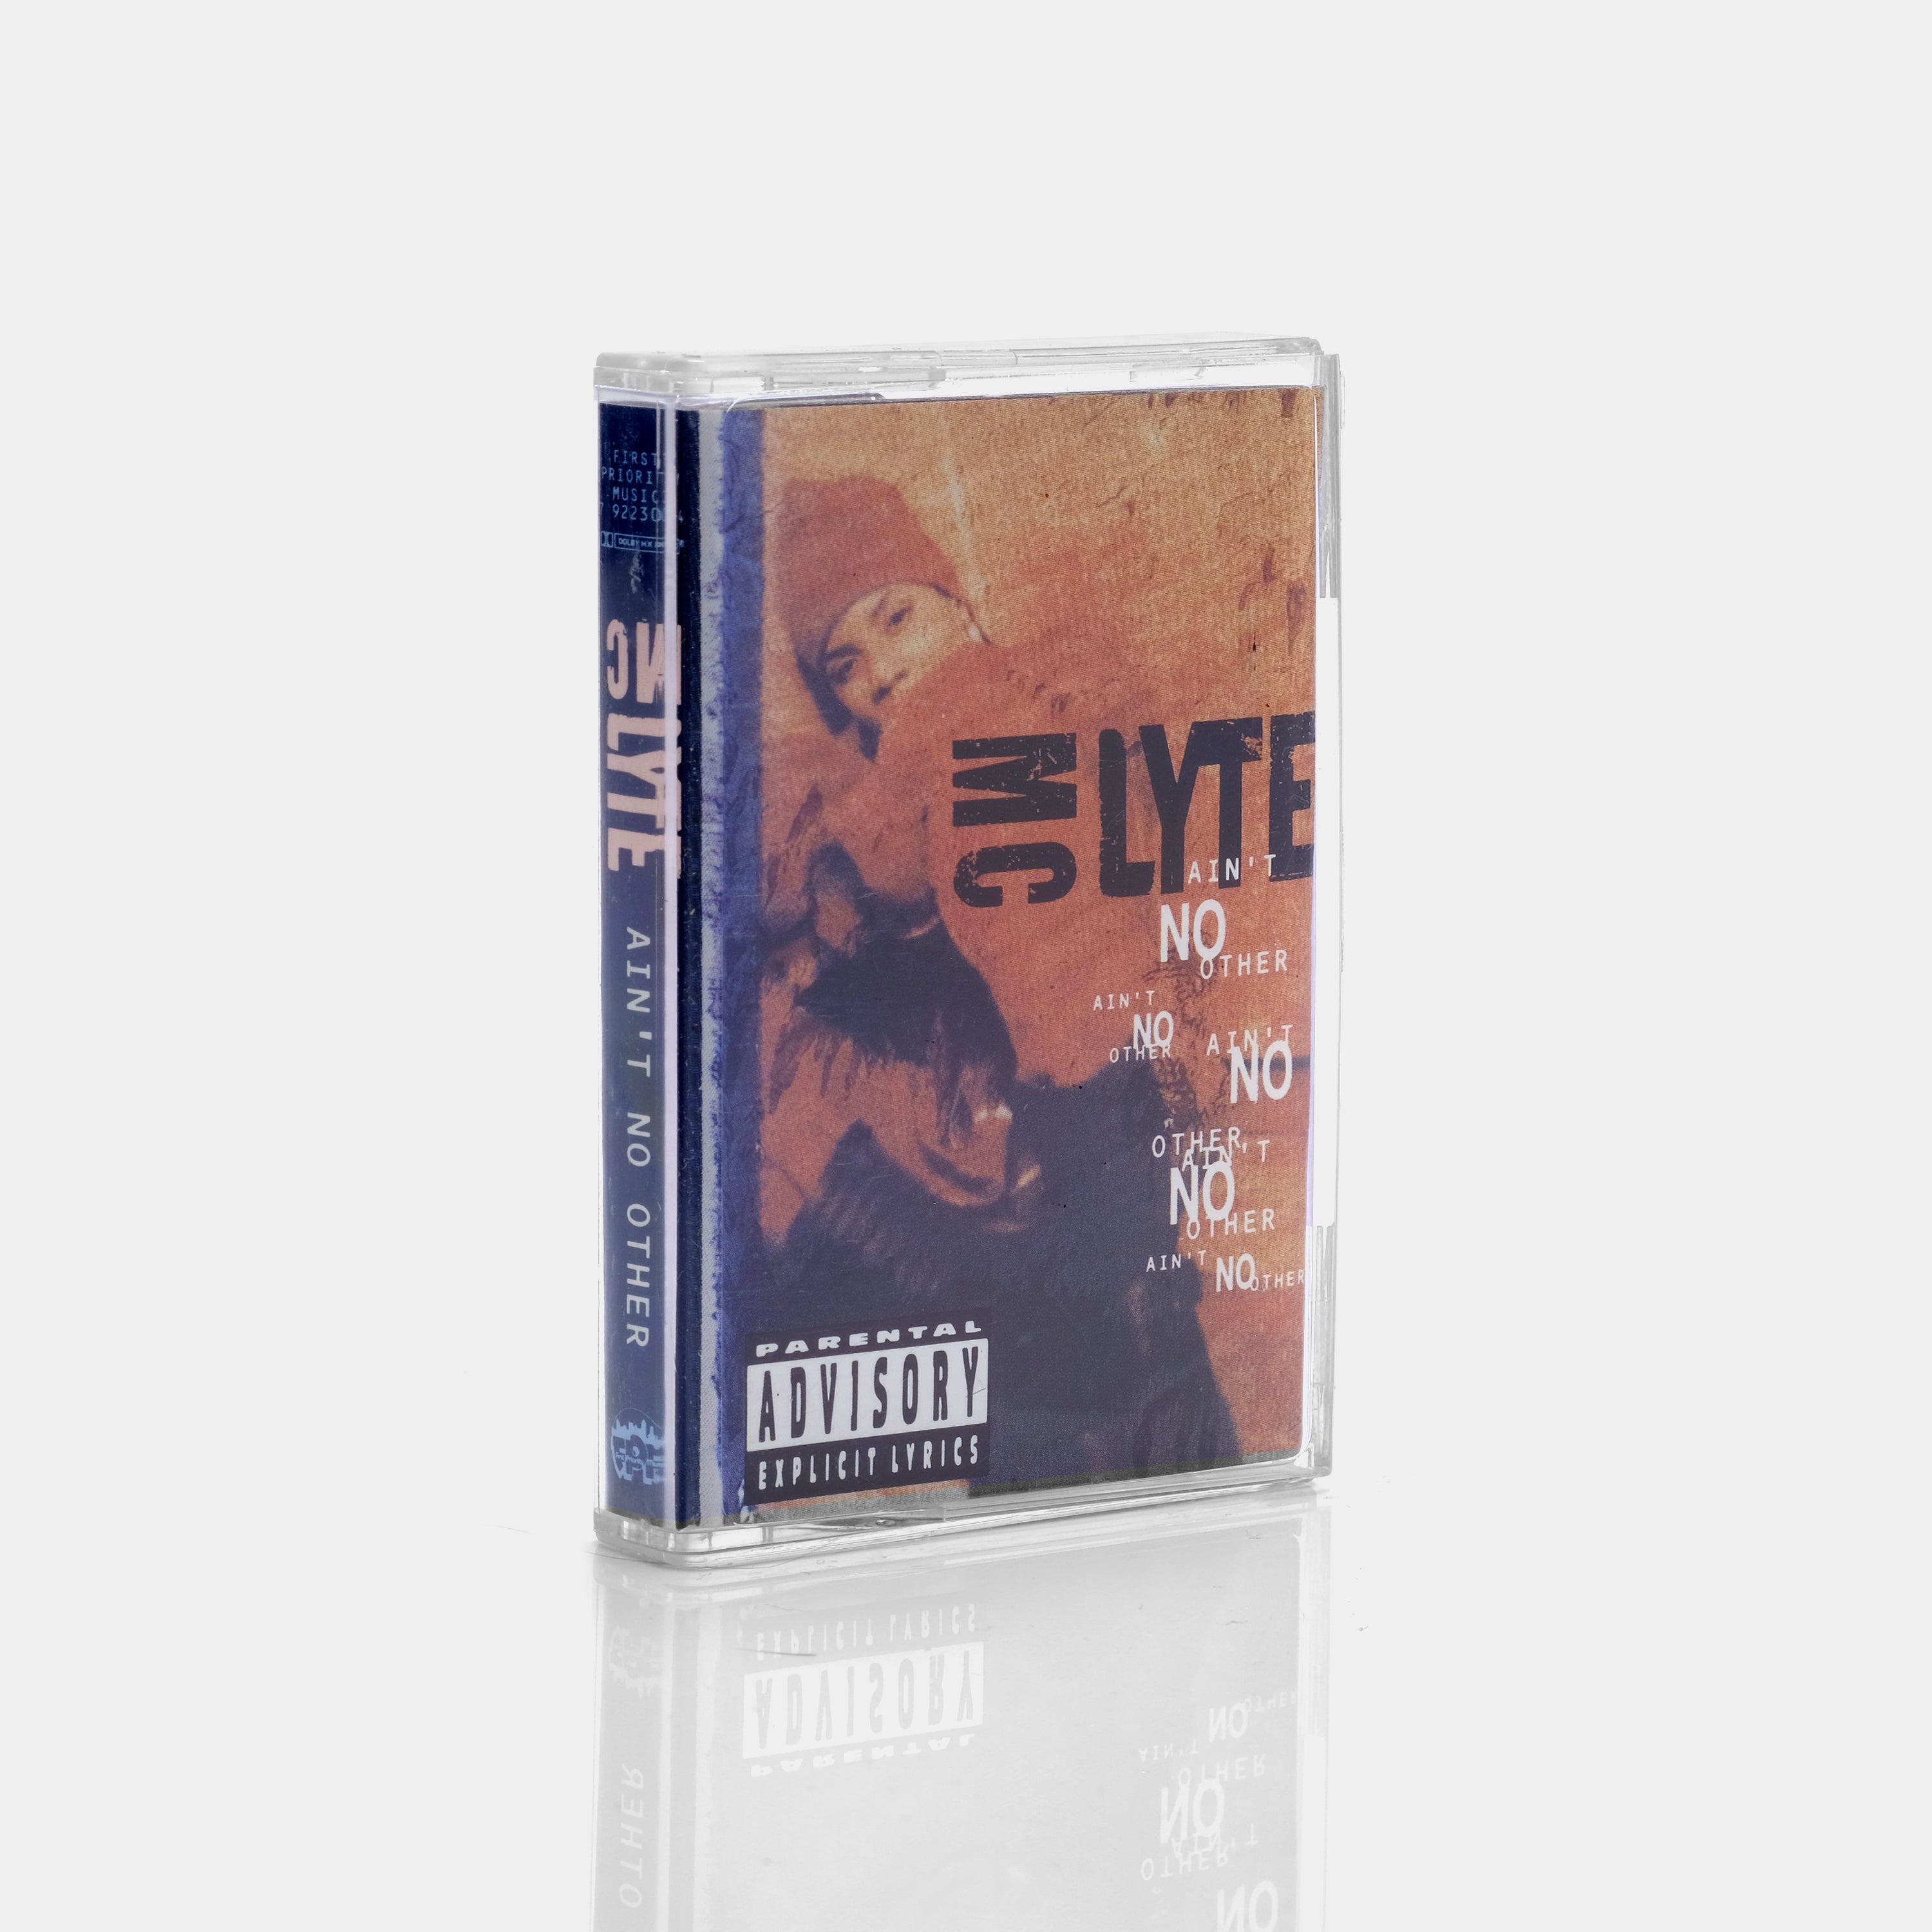 MC Lyte - Ain't No Other Cassette Tape